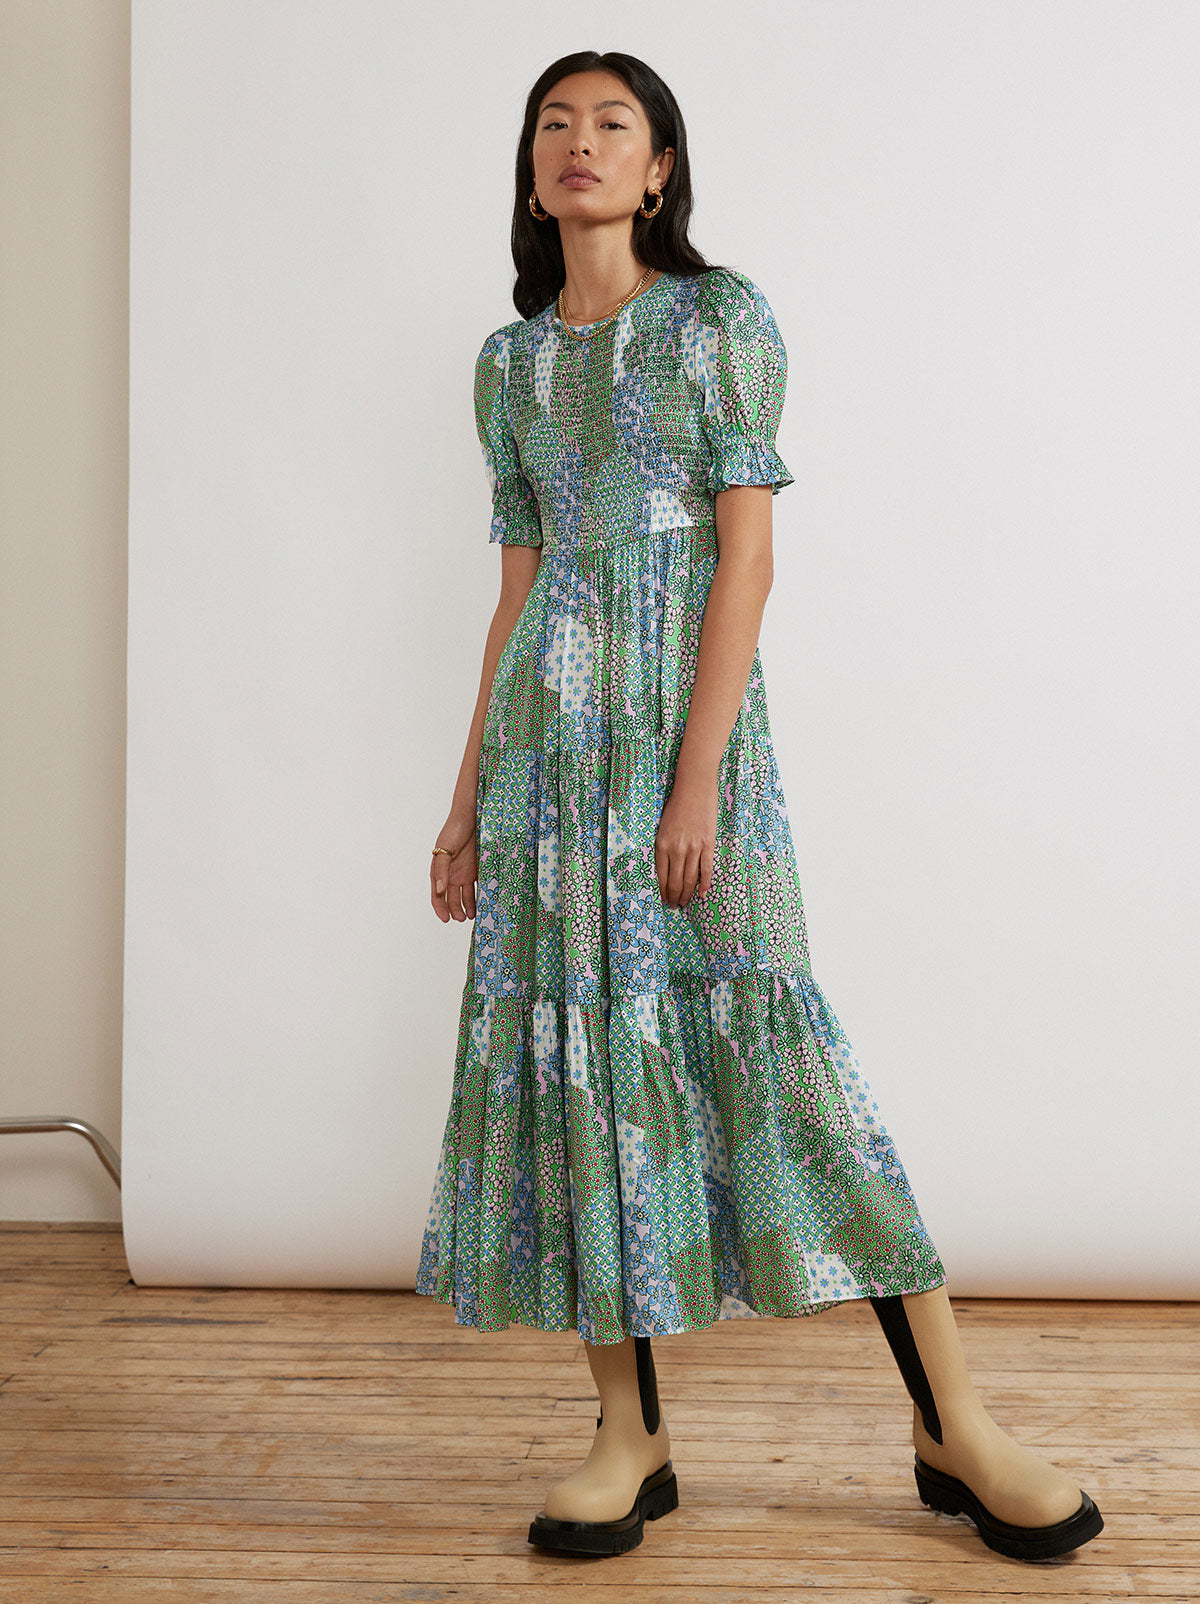 Persephone Shirred Mixed Floral Print Dress By KITRI Studio